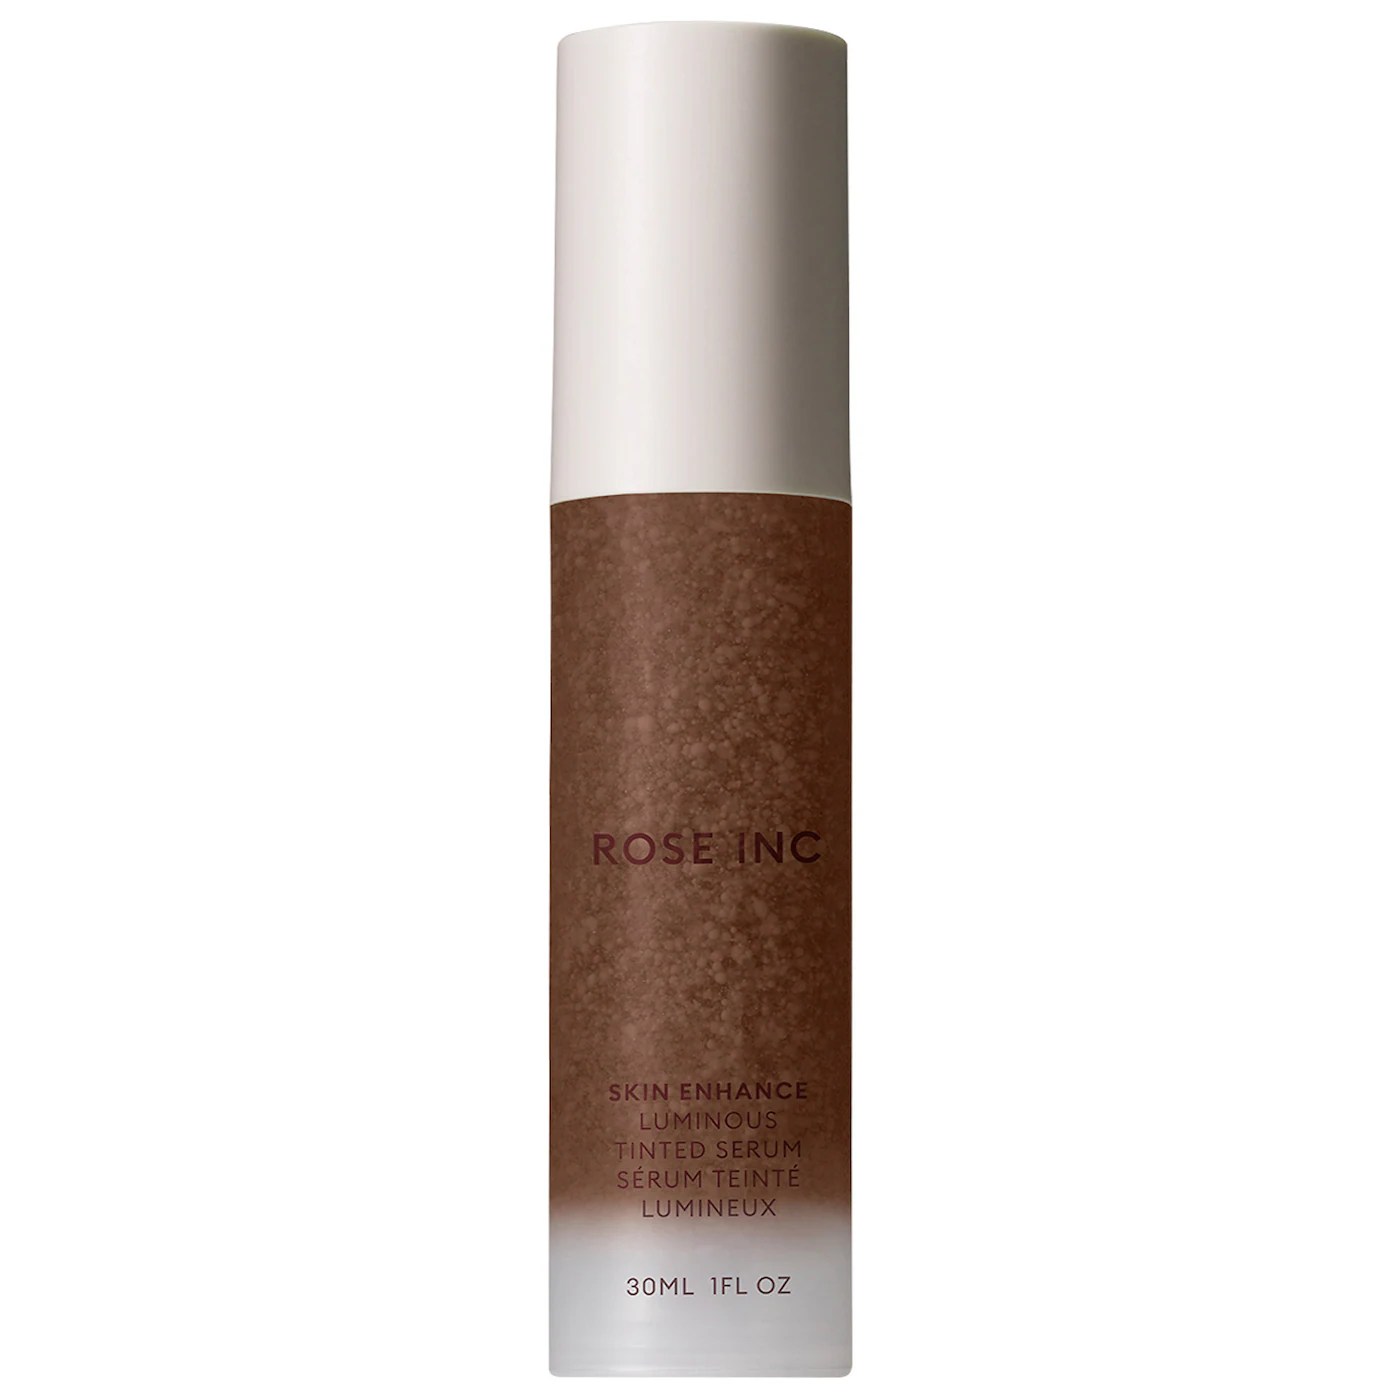 rose inc enhance skin tint serum, one of the best foundations for acne-prone skin